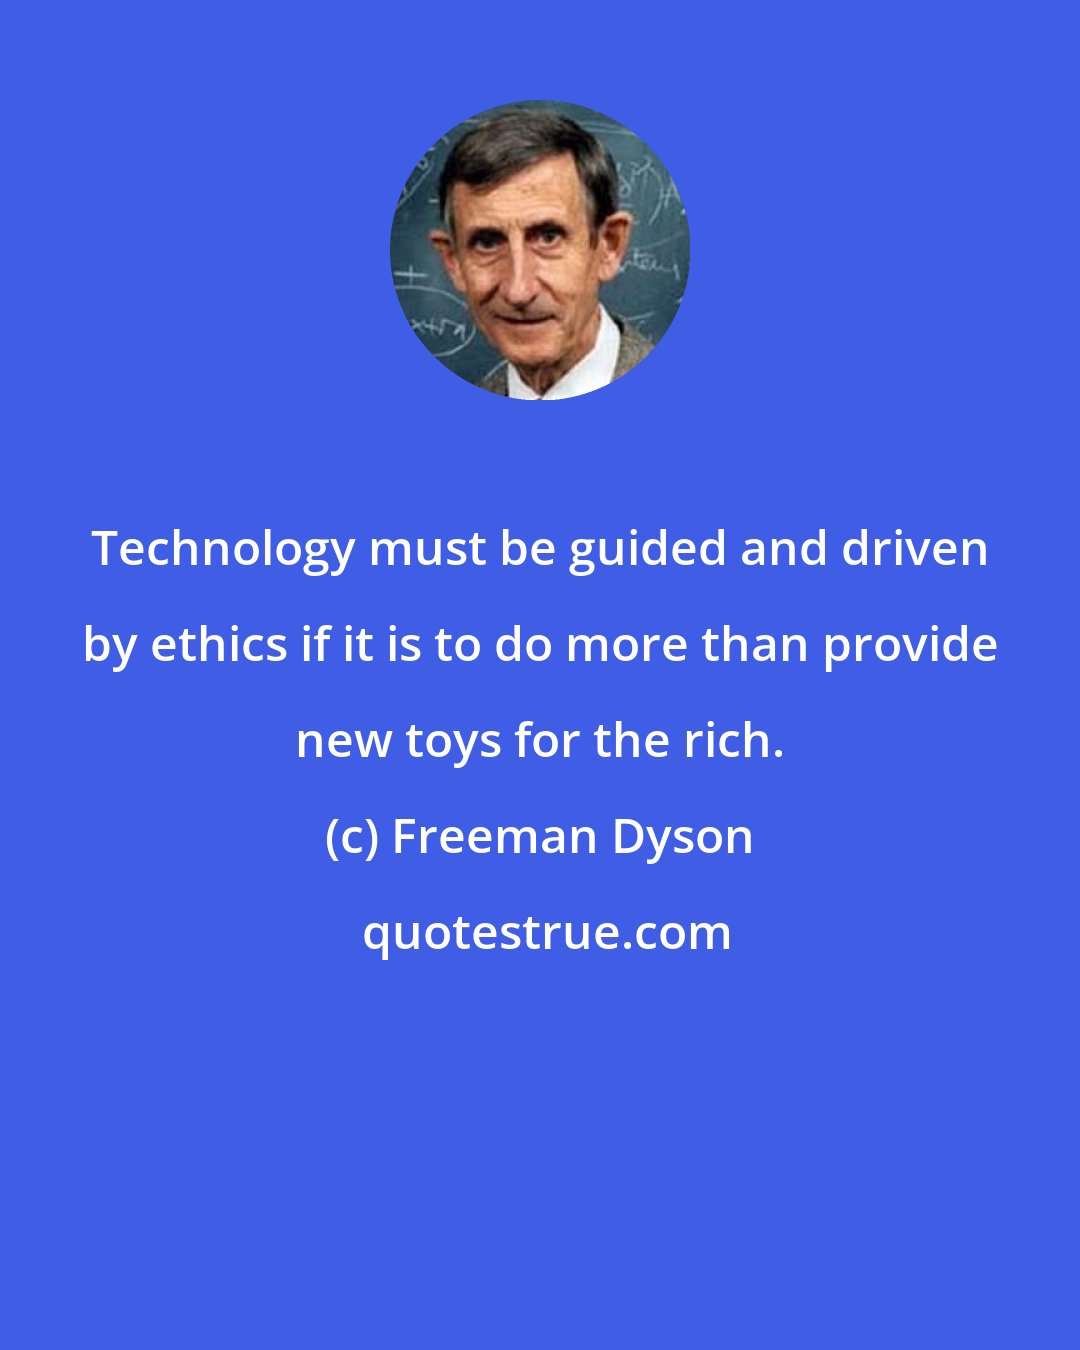 Freeman Dyson: Technology must be guided and driven by ethics if it is to do more than provide new toys for the rich.